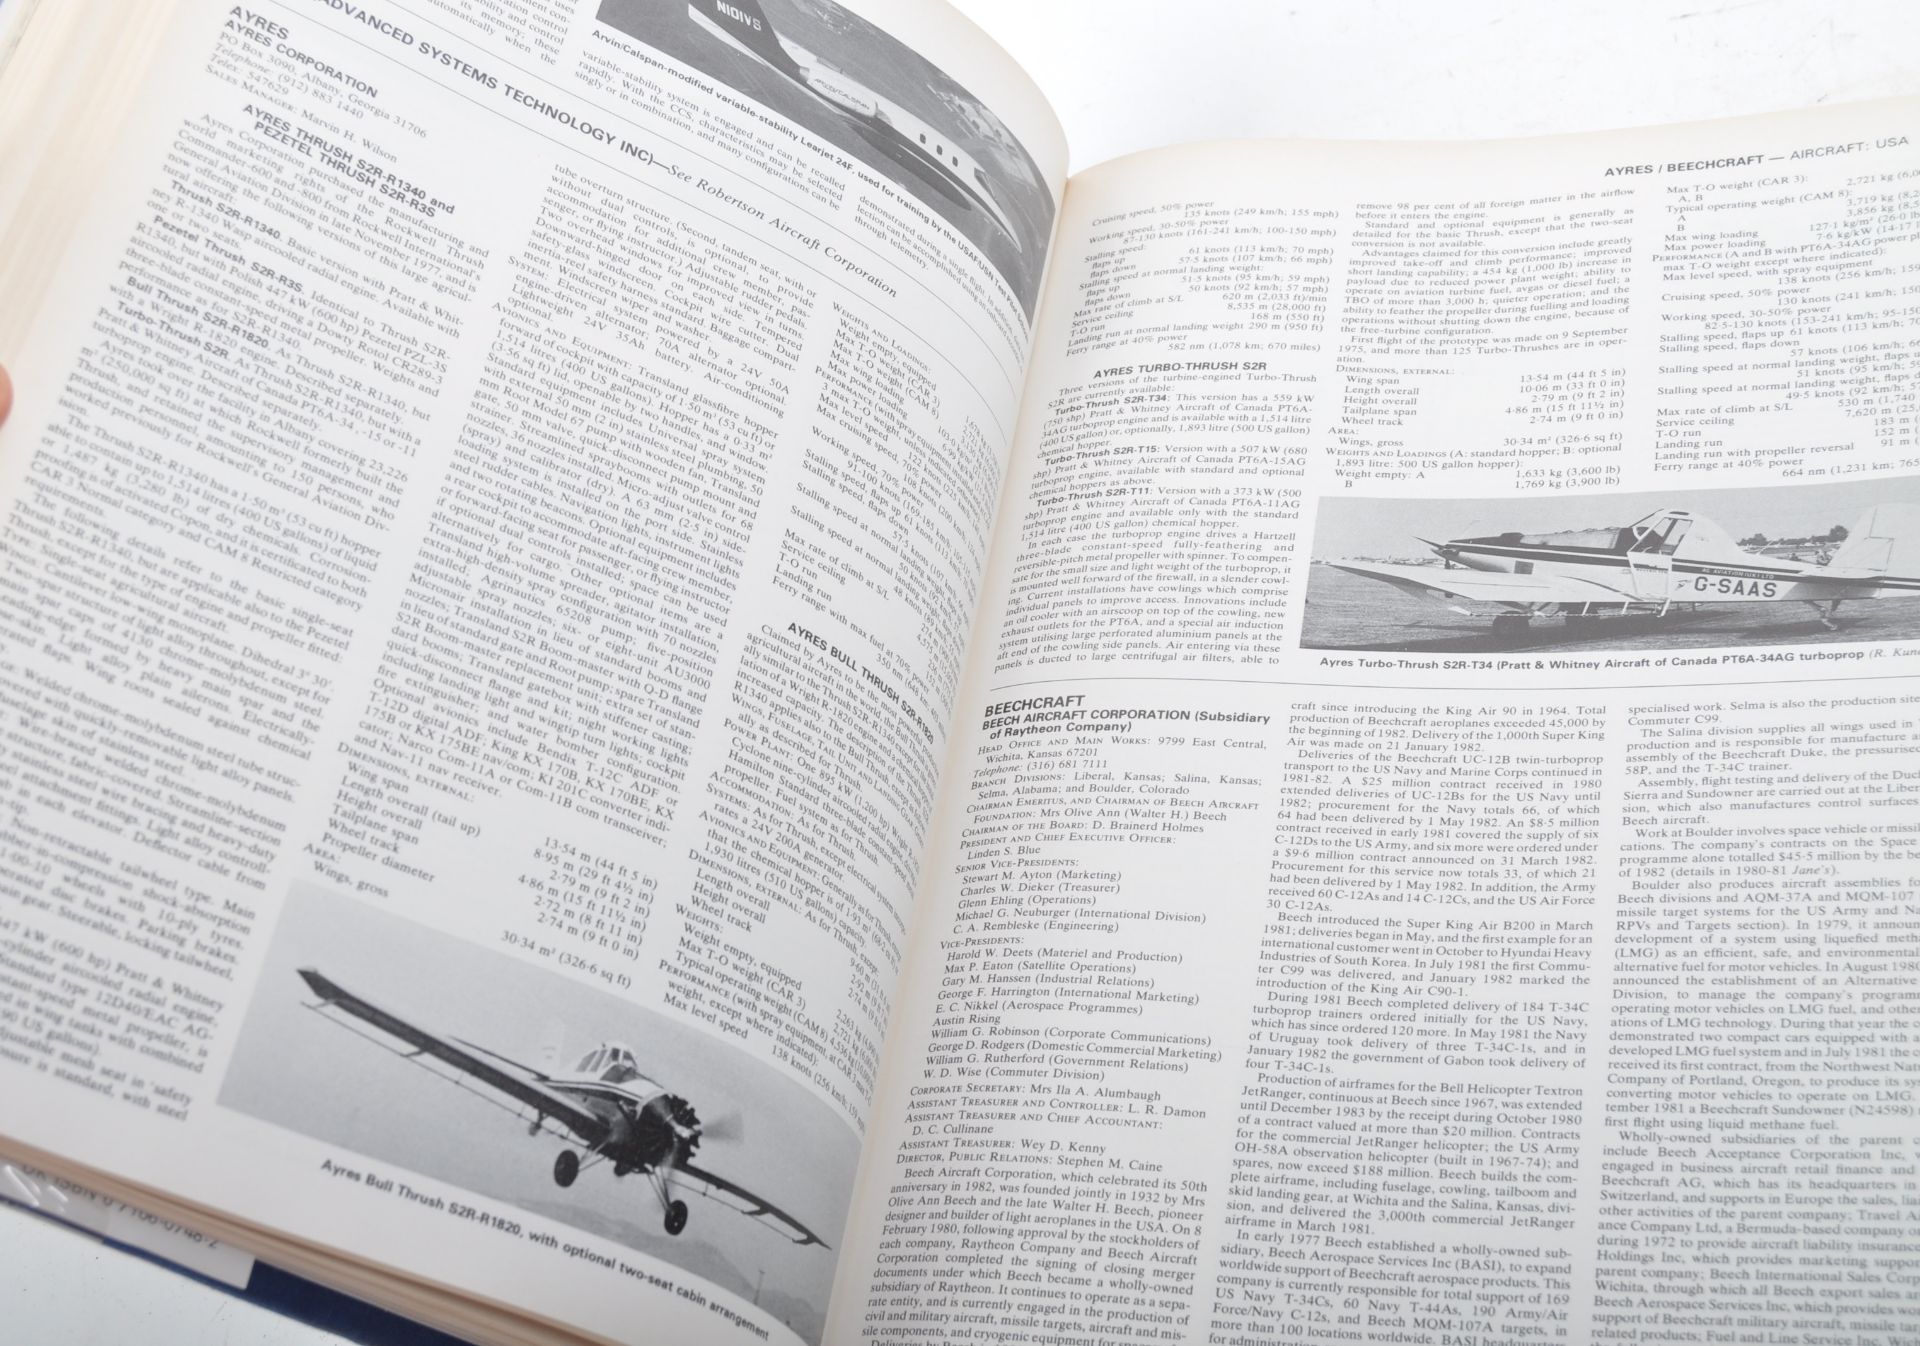 COLLECTION OF X4 JANES ALL THE WORLDS AIRCRAFTS BOOKS - Image 4 of 6